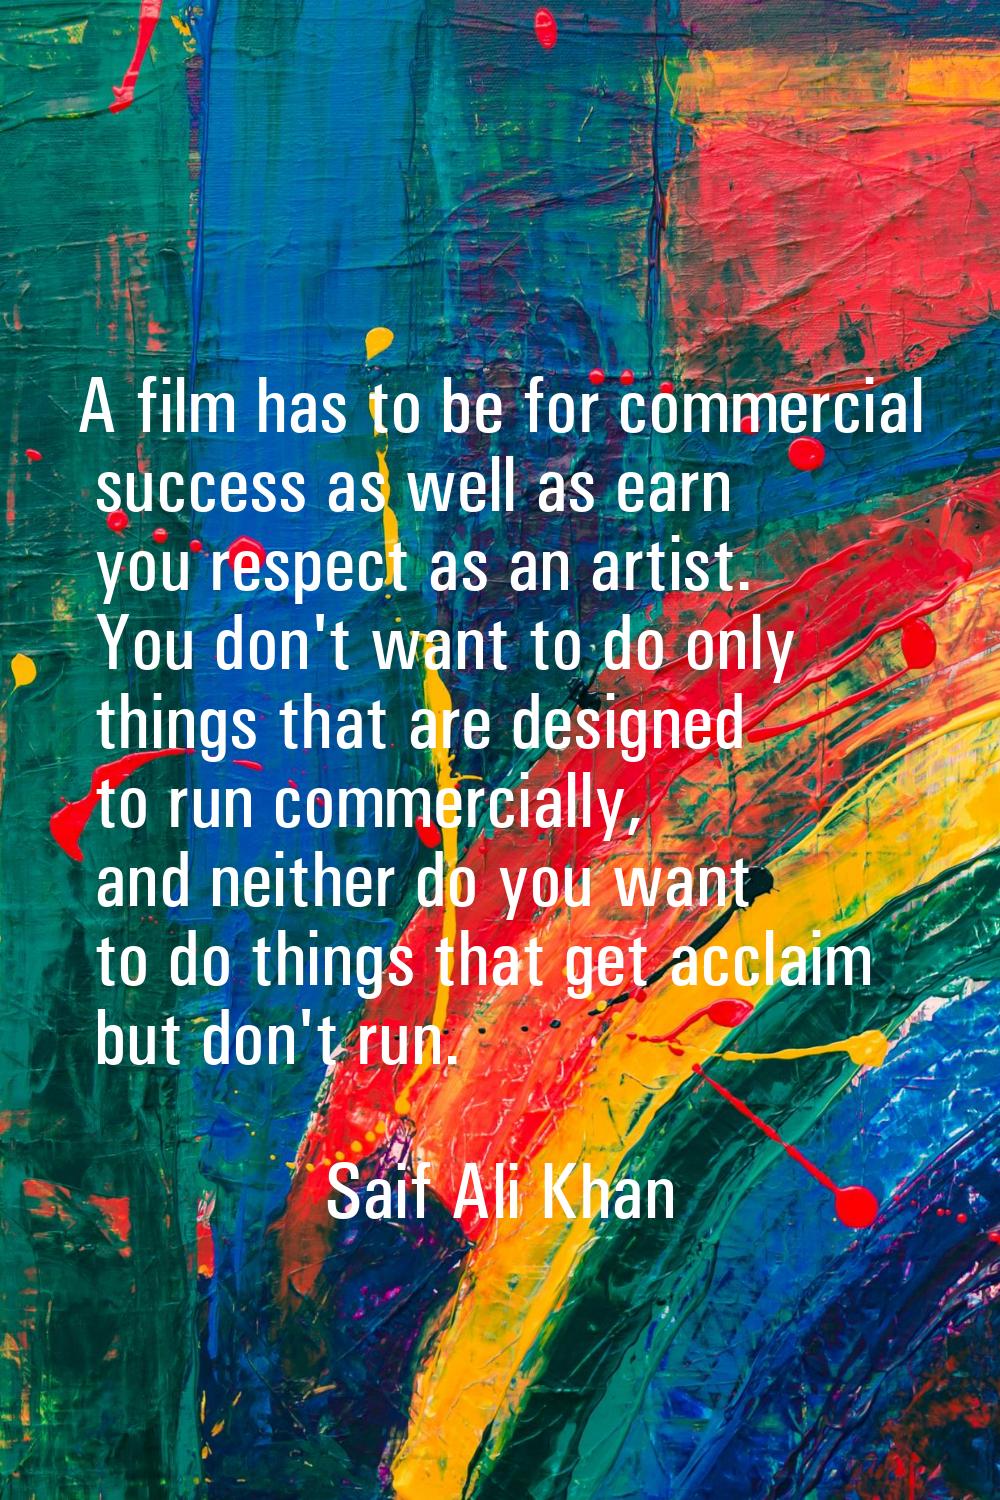 A film has to be for commercial success as well as earn you respect as an artist. You don't want to